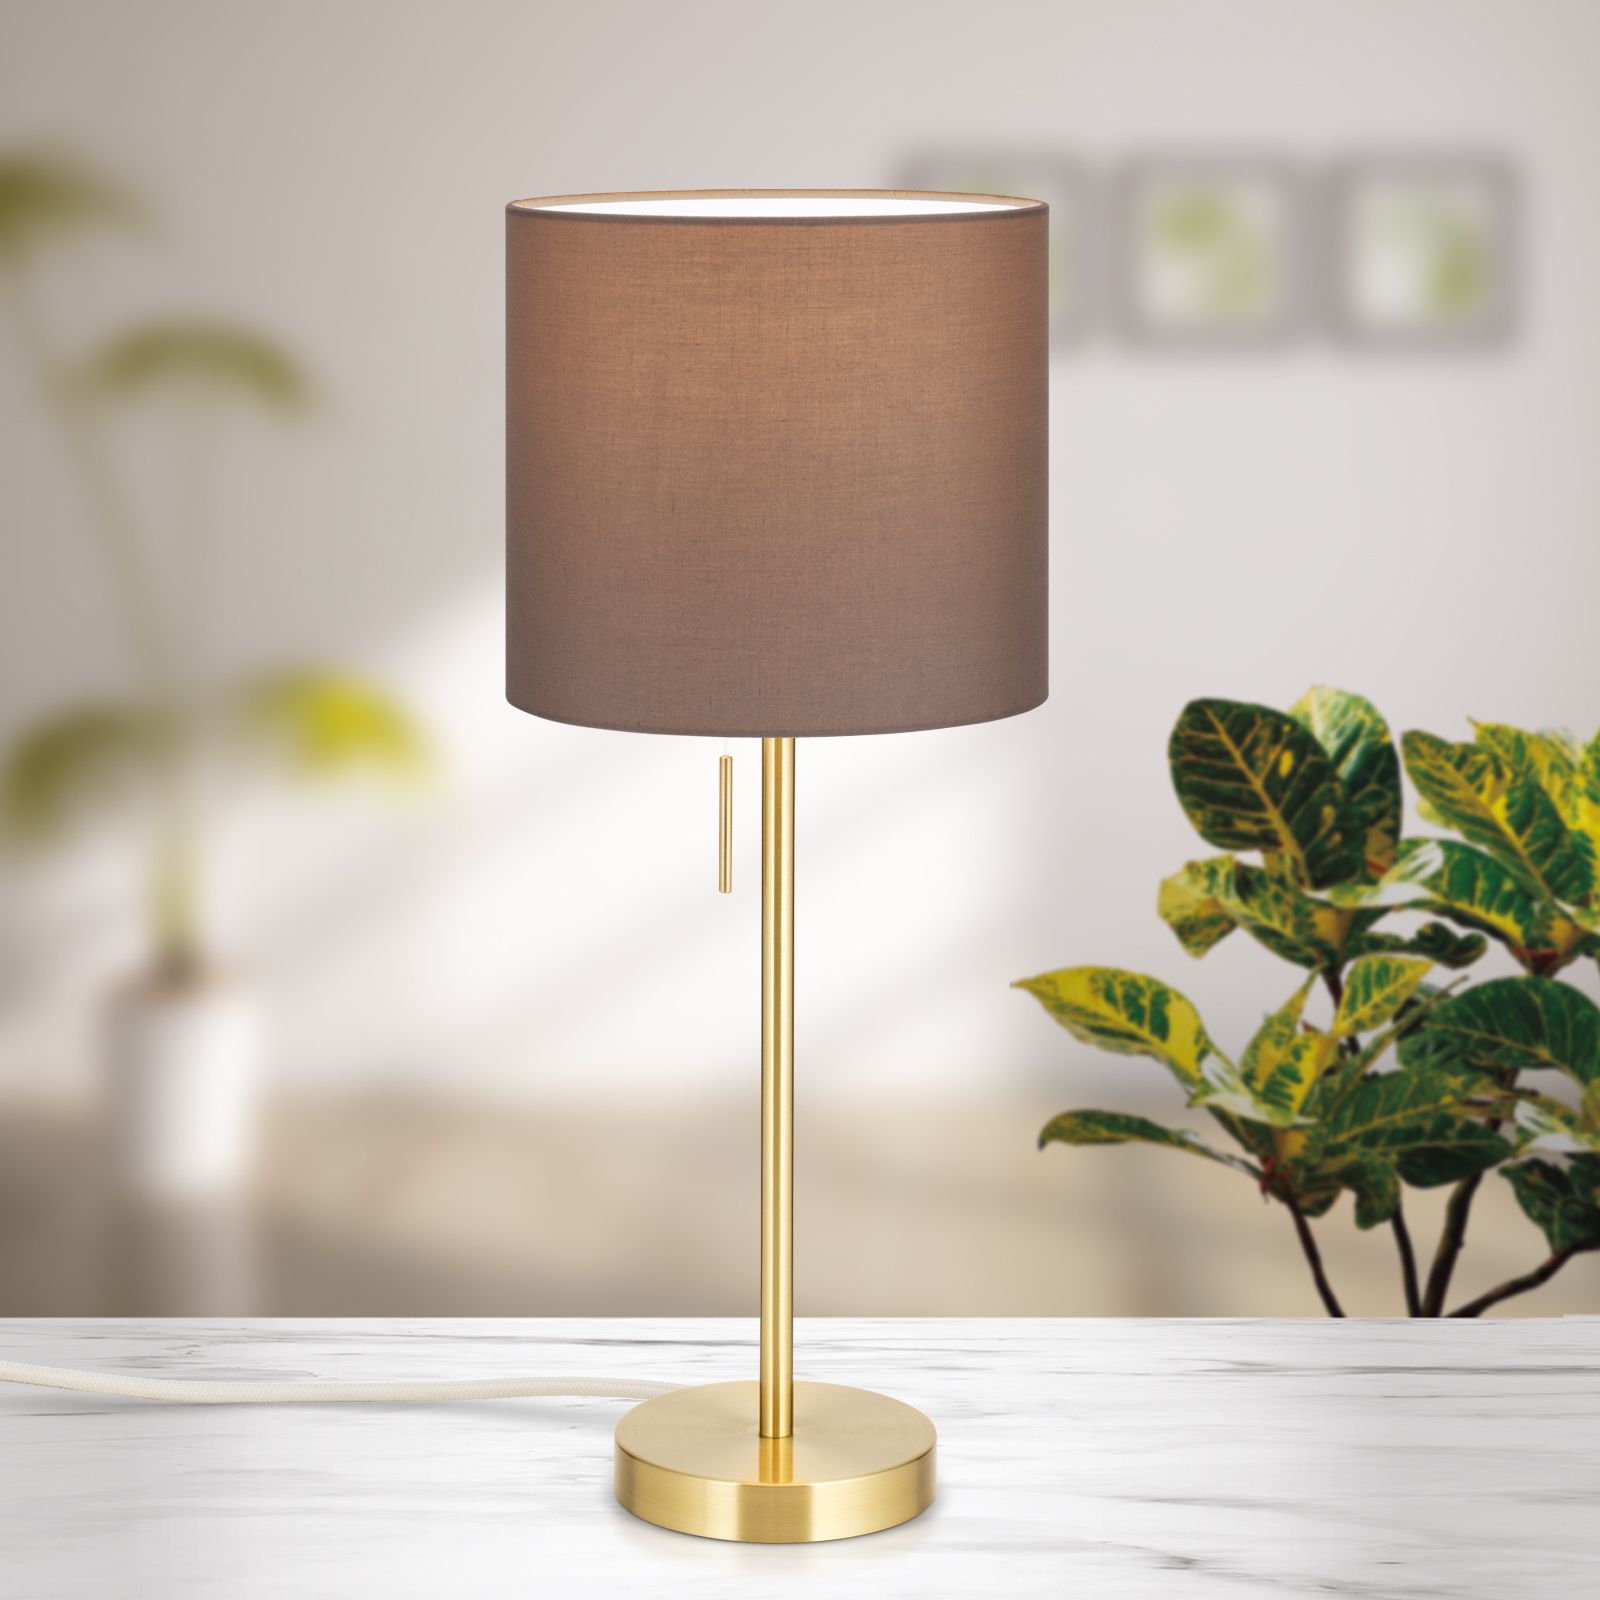 Table lamp SHADE, small, brass matt, with cylindrical, brown shade